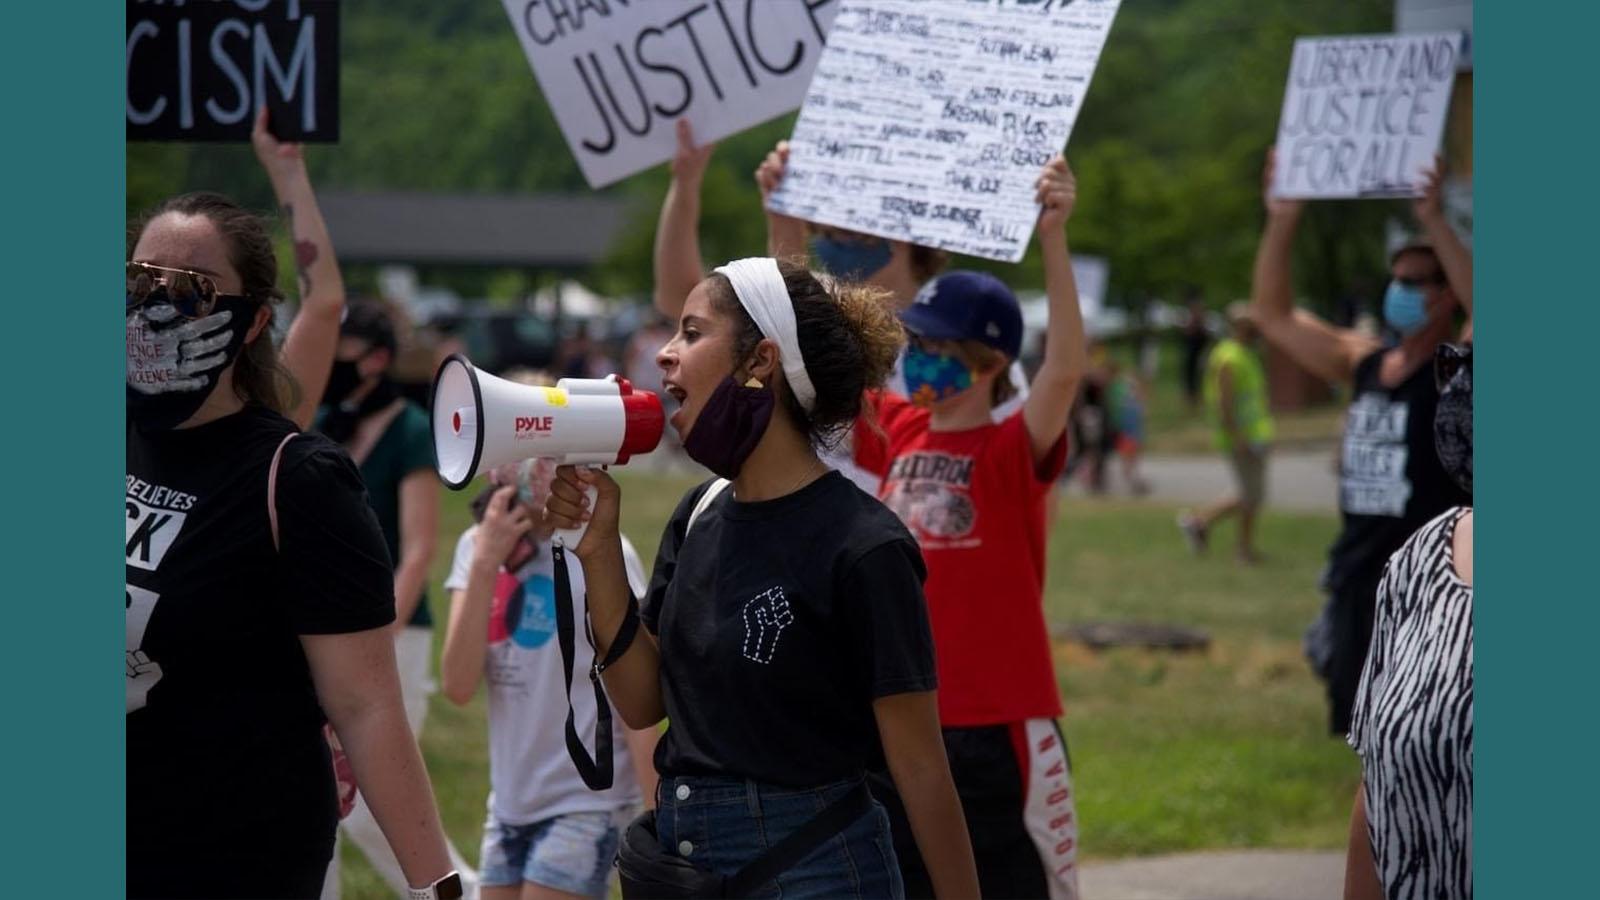 Black Lives Matter protester using a megaphone with other protesters holding signs in background